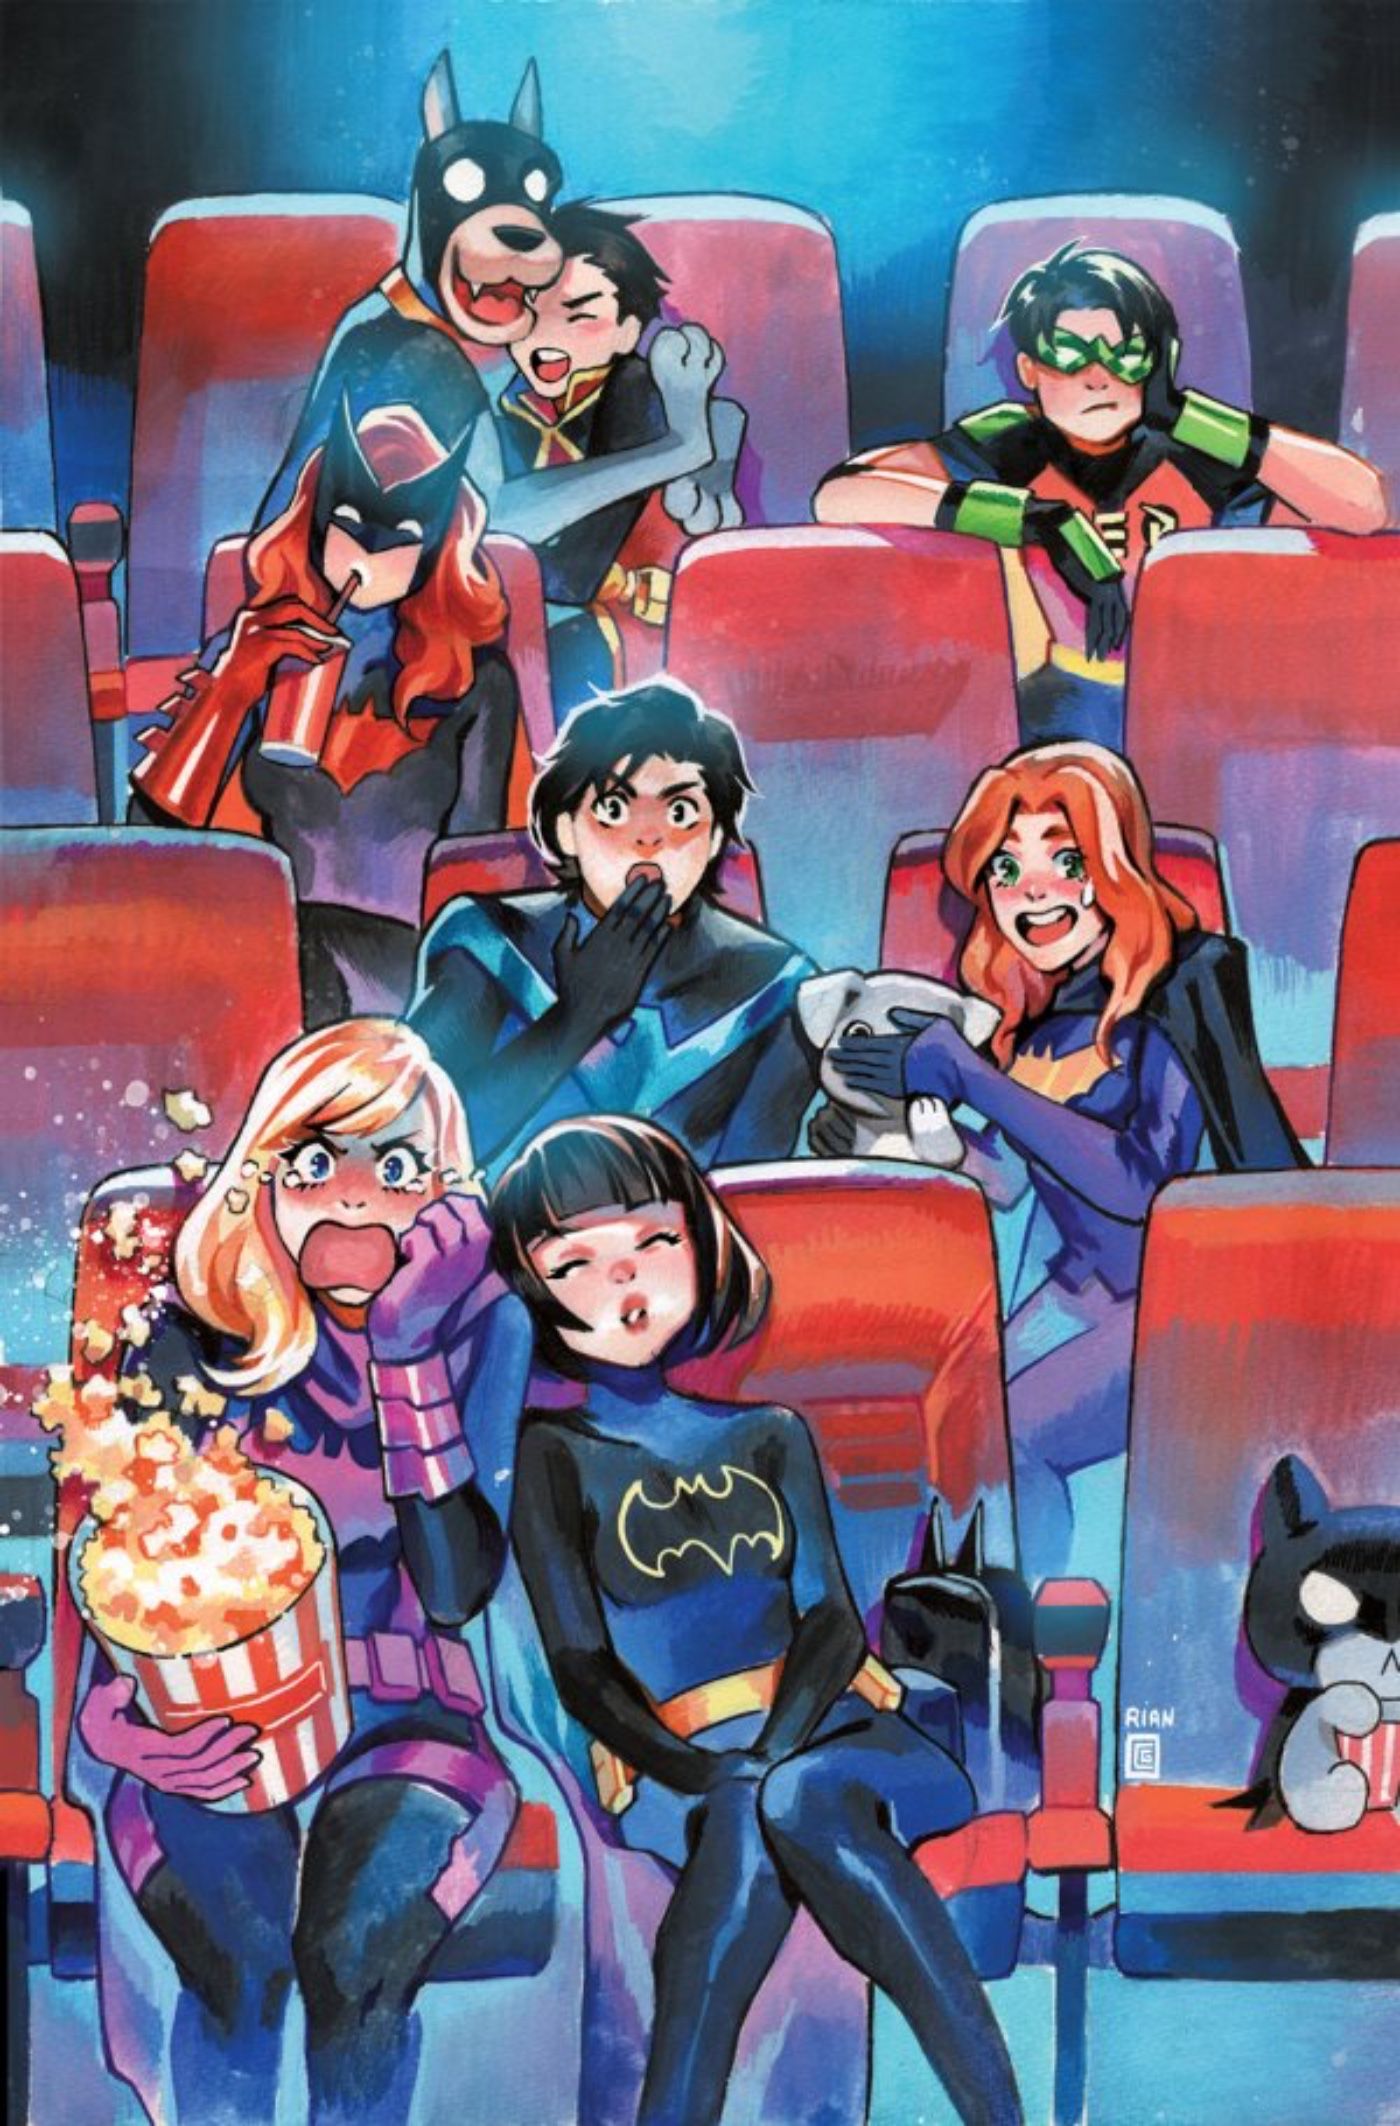 Bat-Family Gets Together For Movie Night in Adorable Batgirls Cover Art